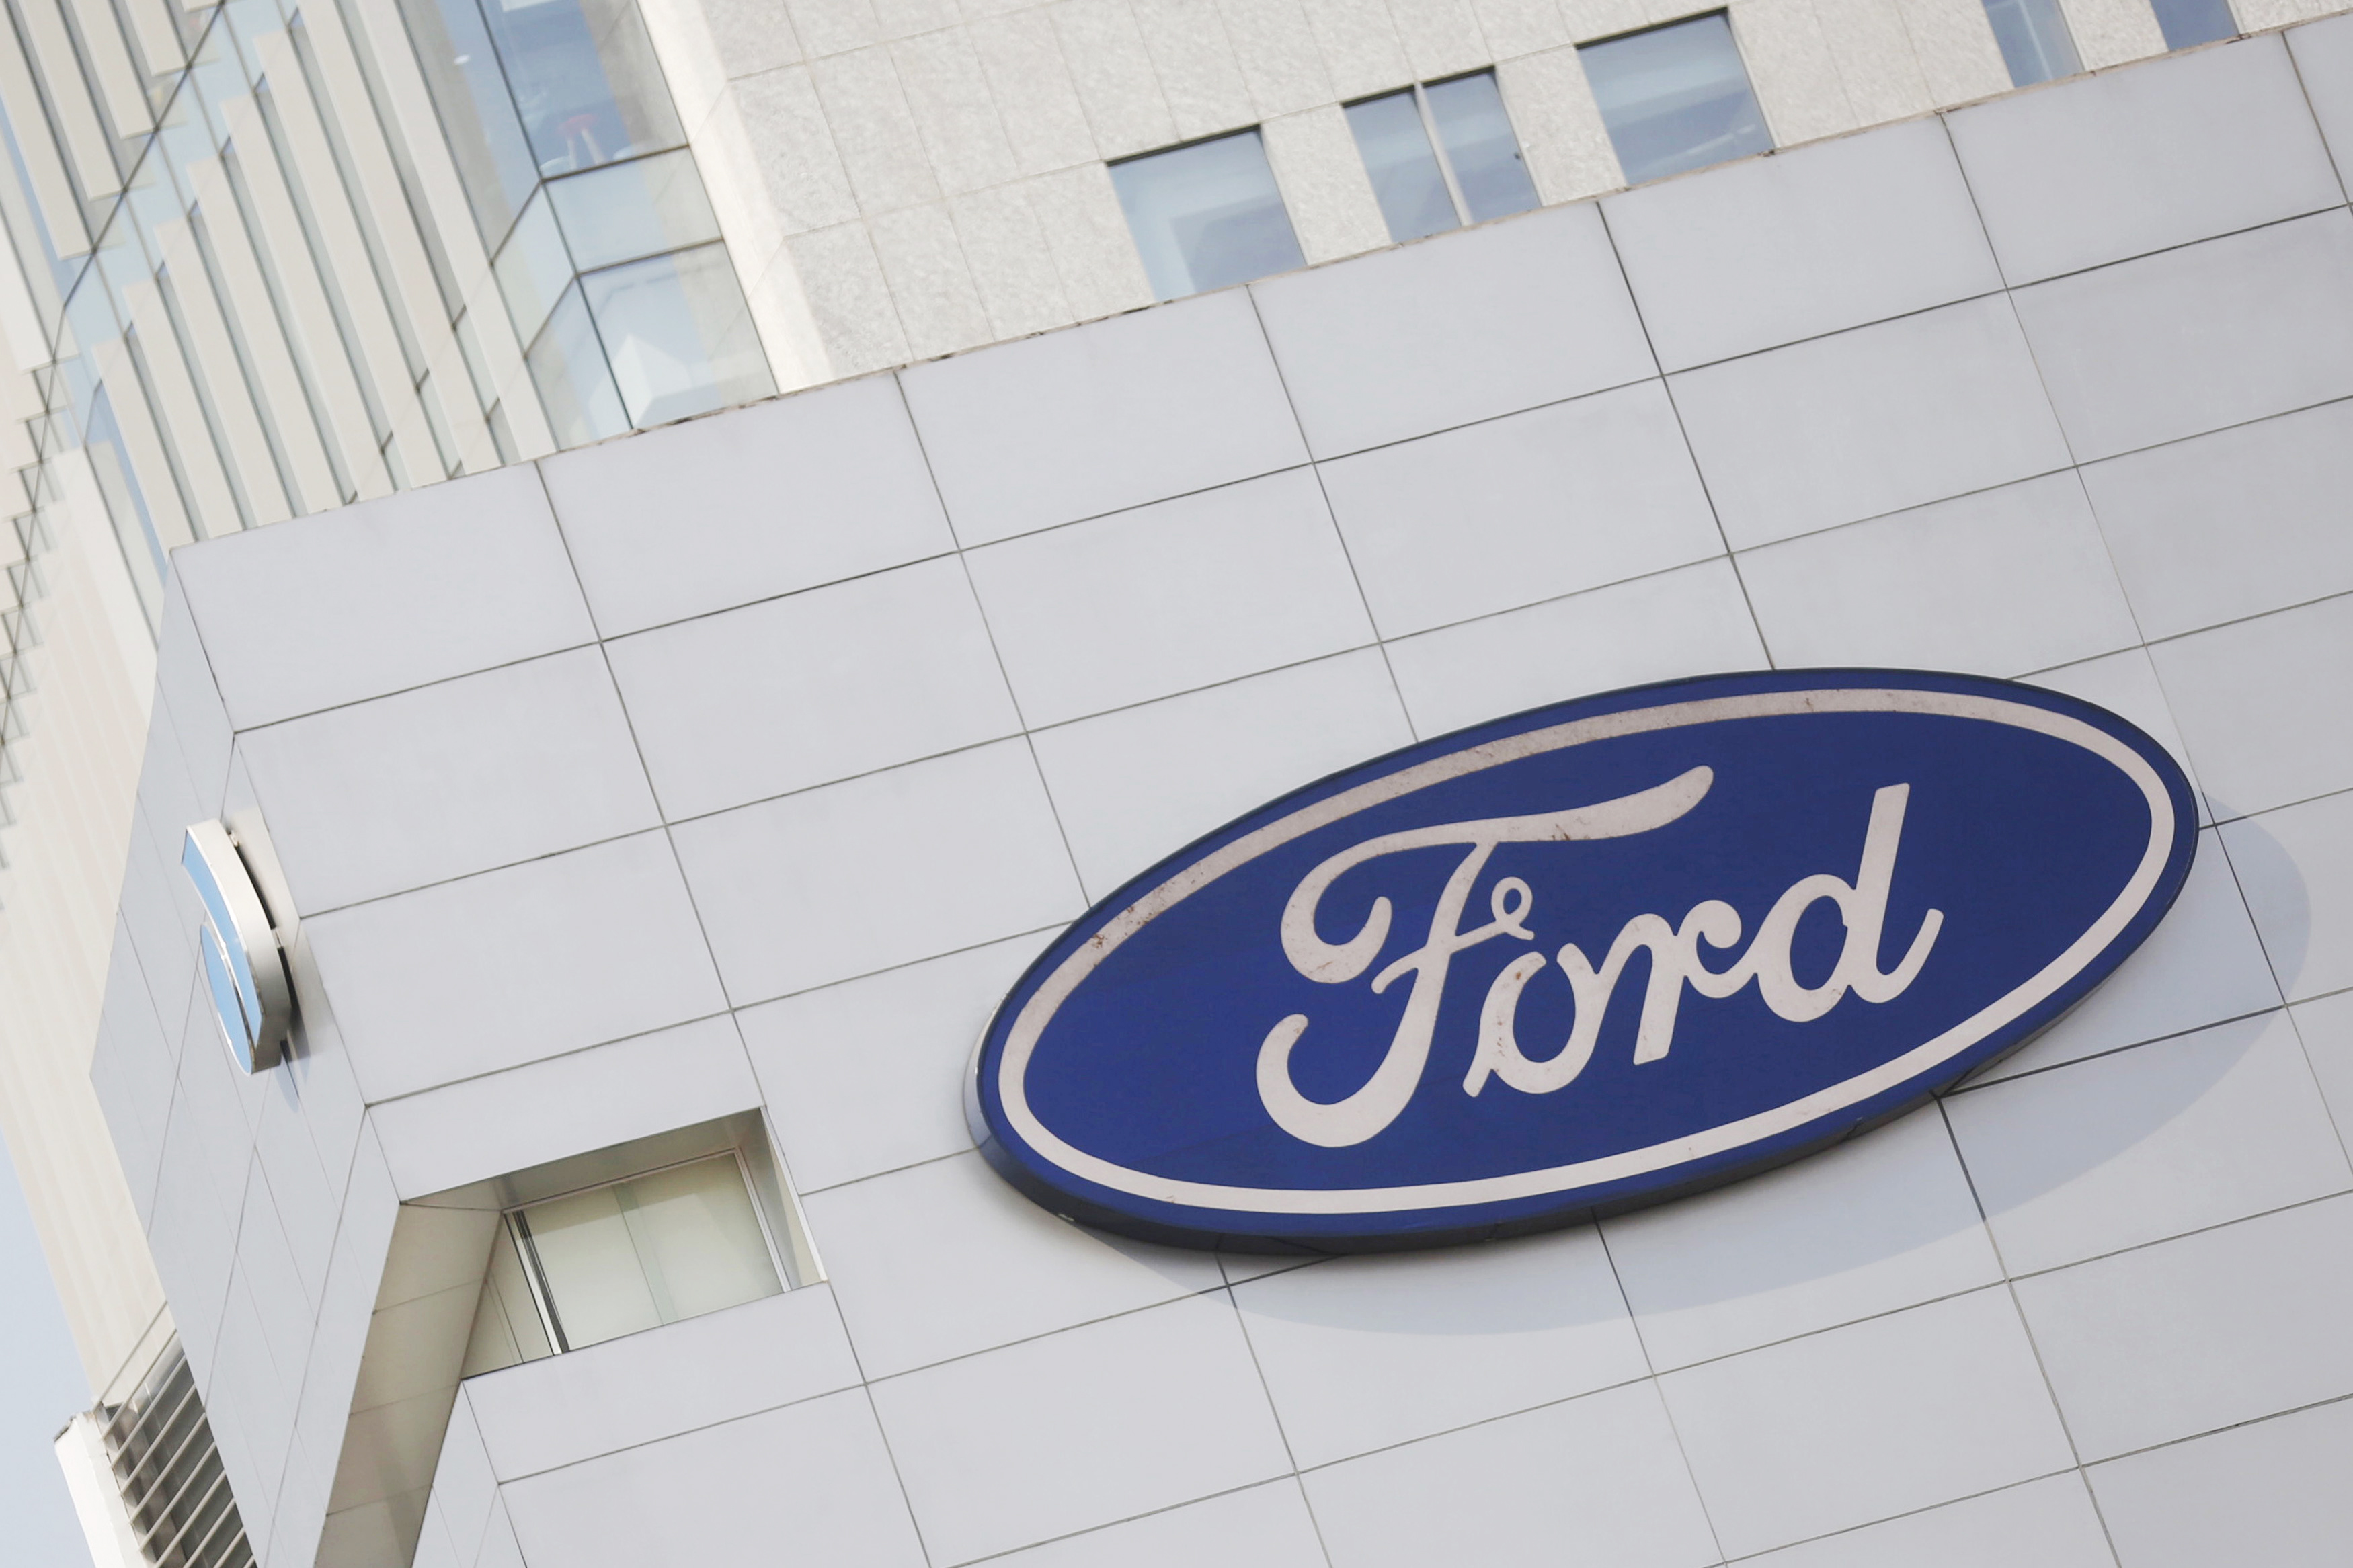 A Ford logo is pictured at a store of the automaker, in Mexico City